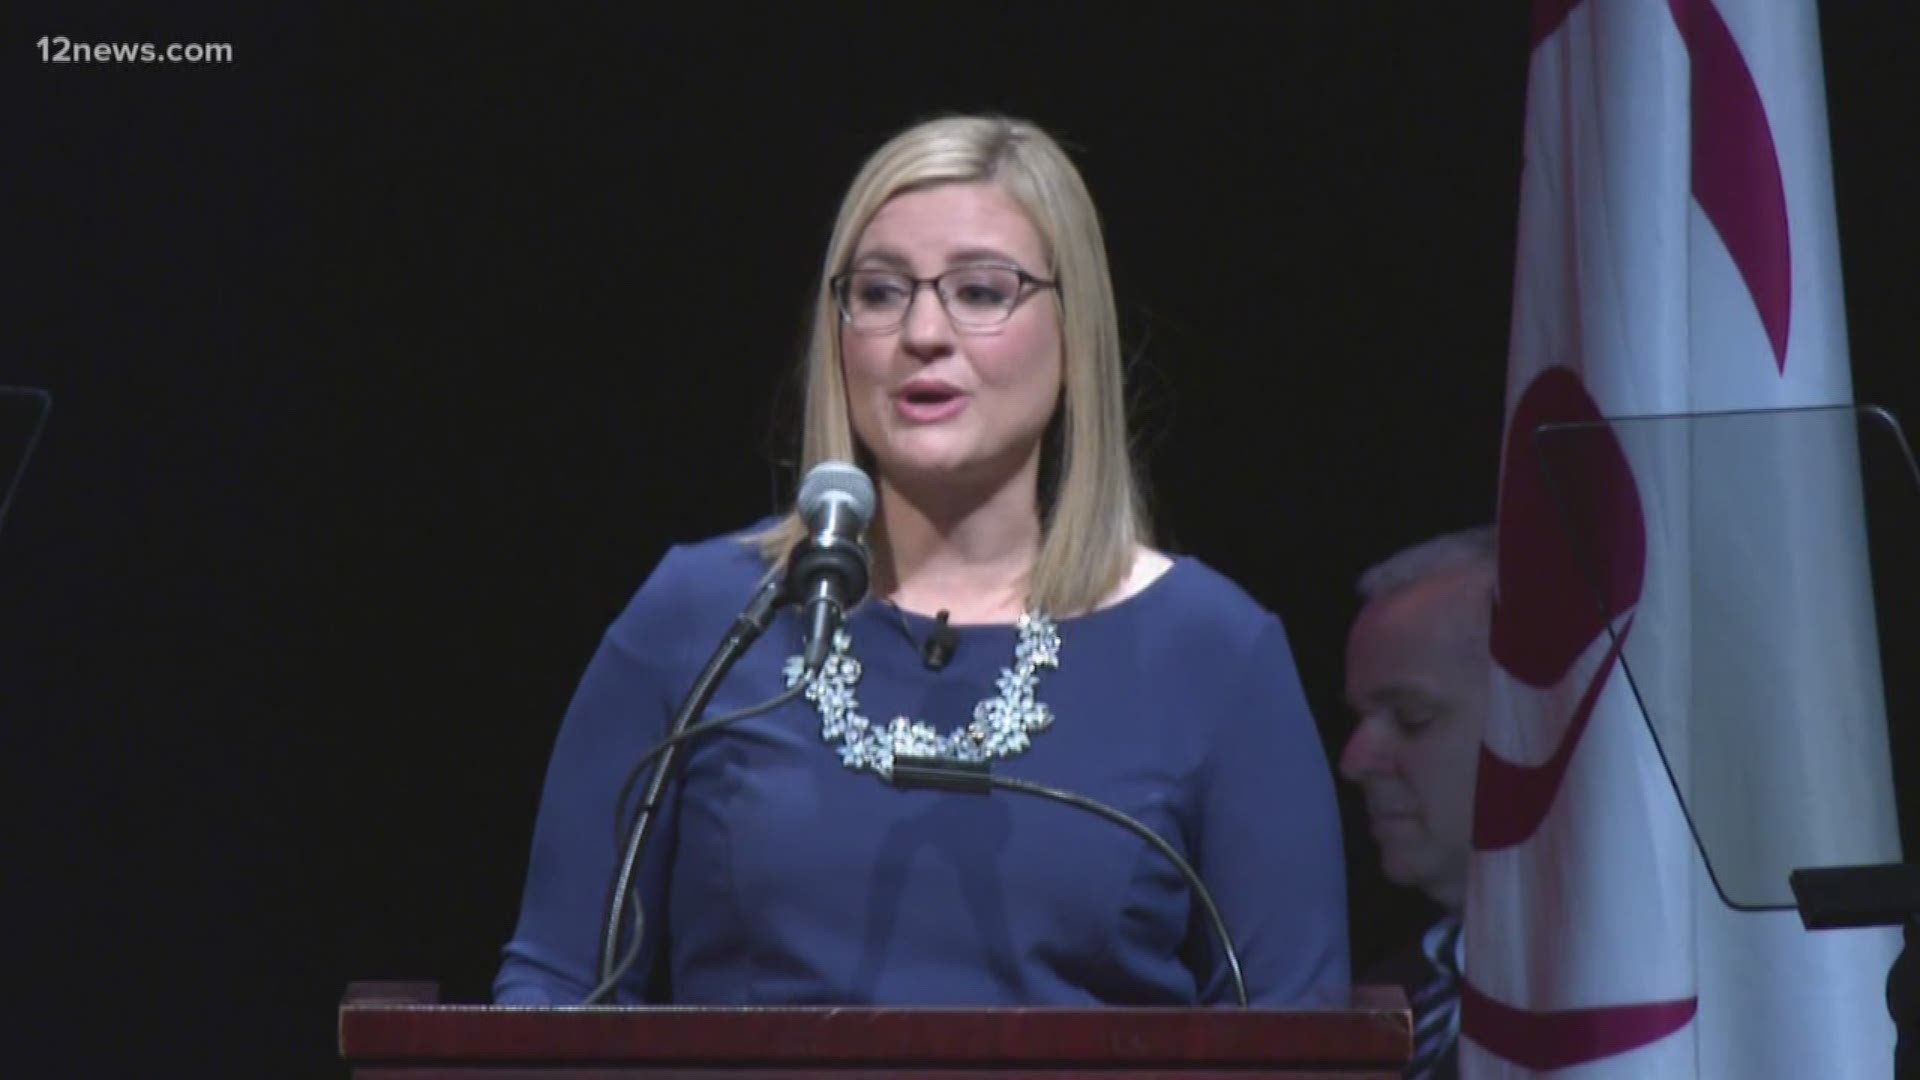 Kate Gallego was sworn in as the new mayor of the City of Phoenix Thursday. Her speech focused on uniting the city.